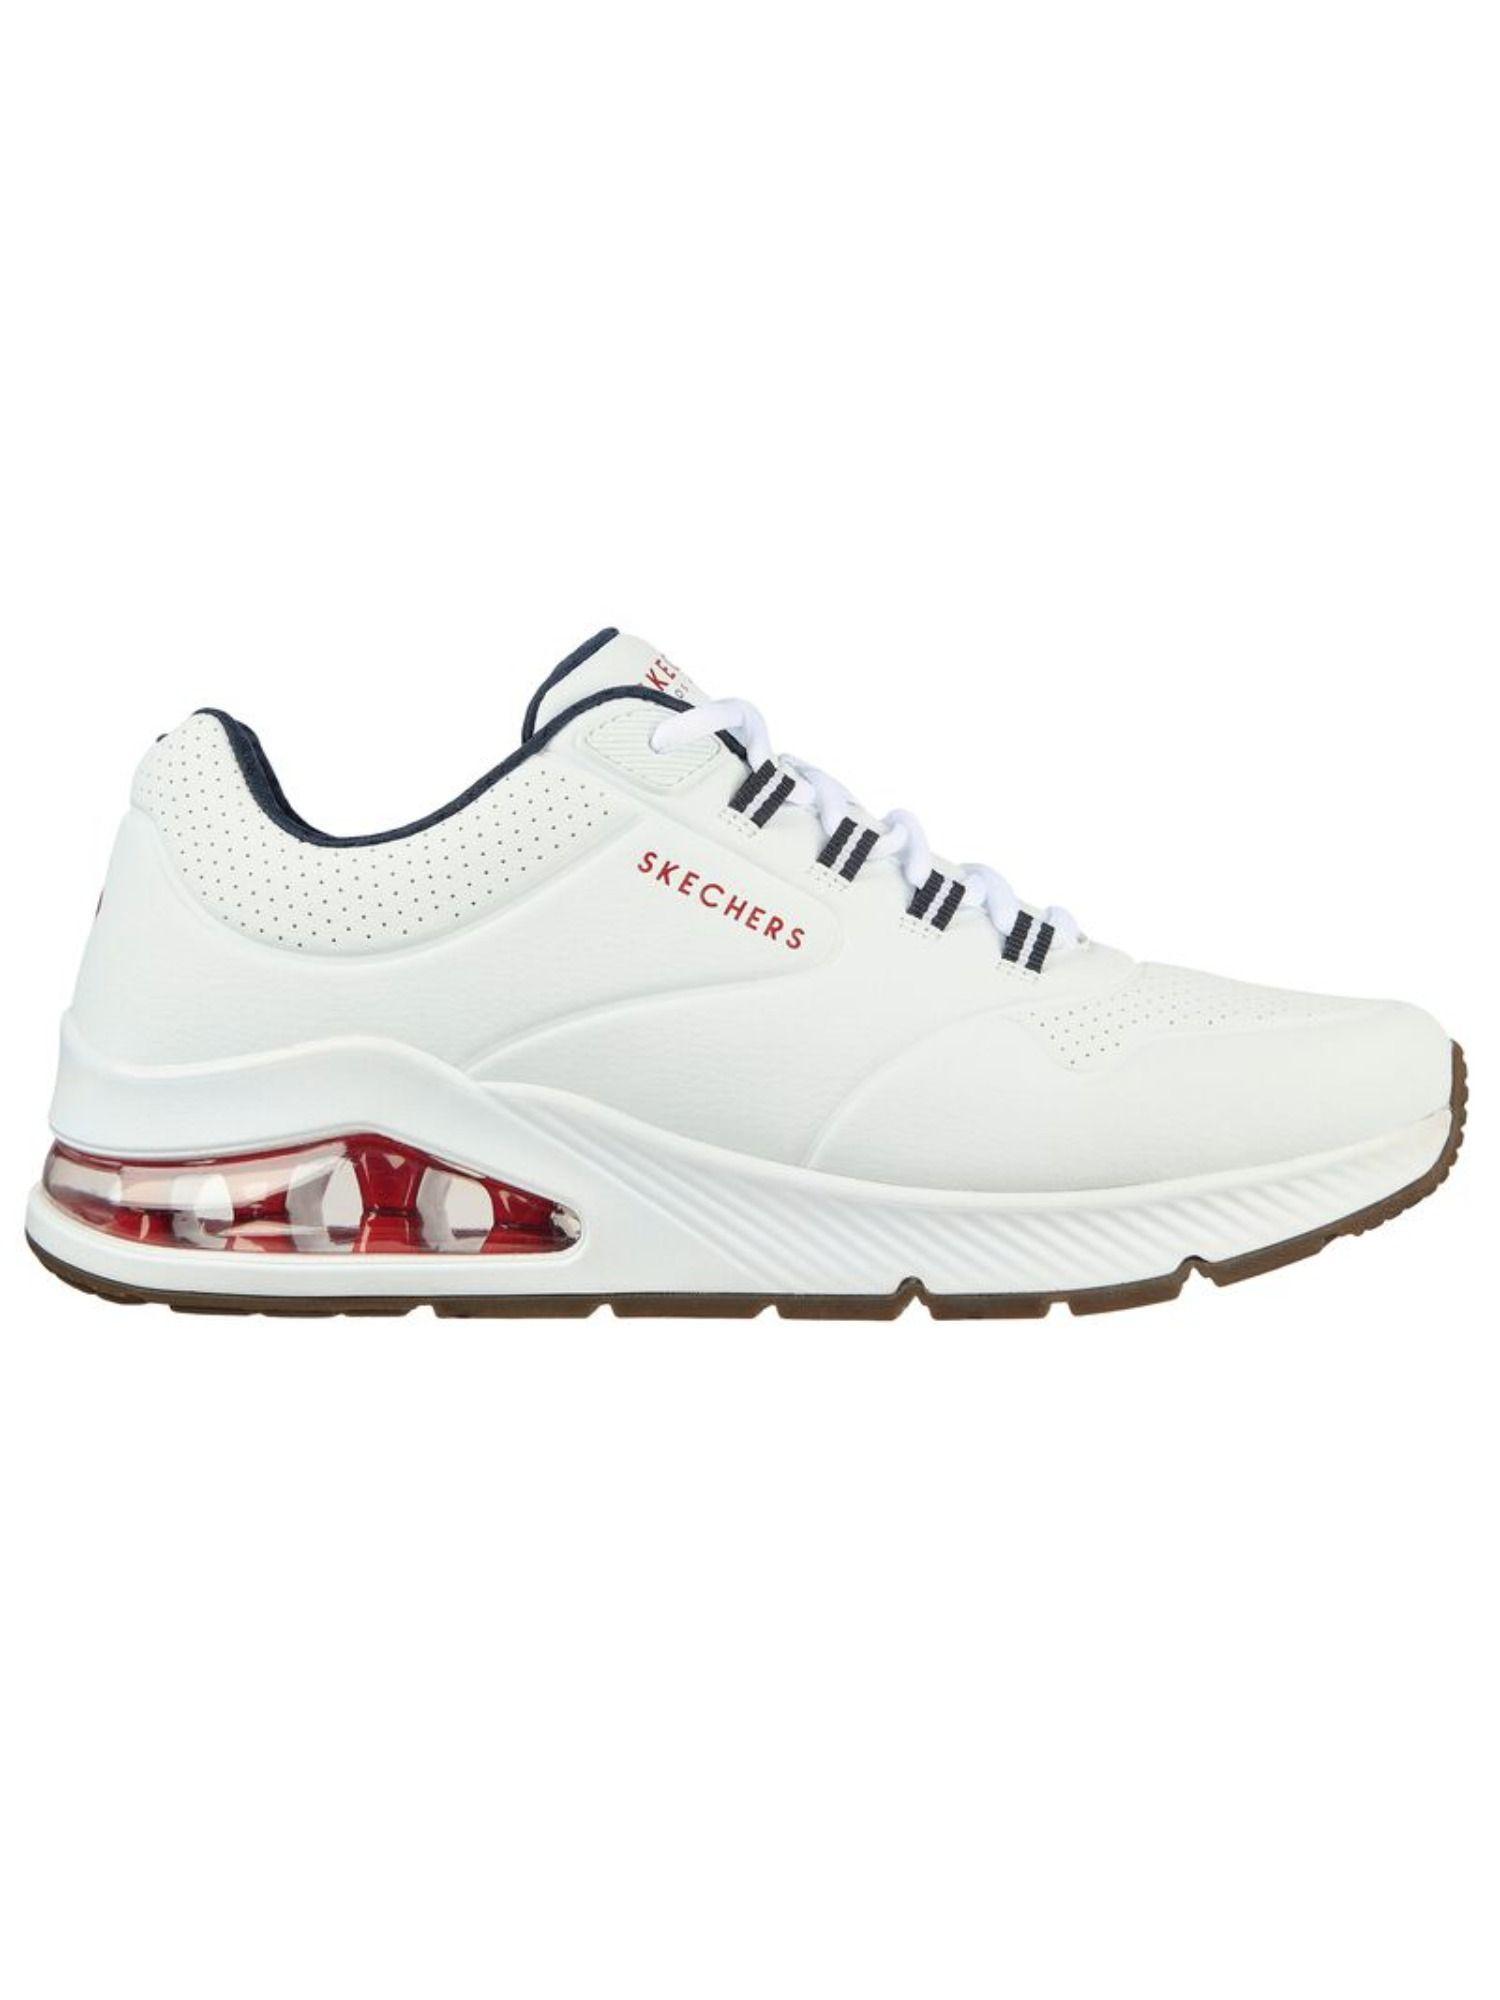 uno-2-white-sport-casual-shoes